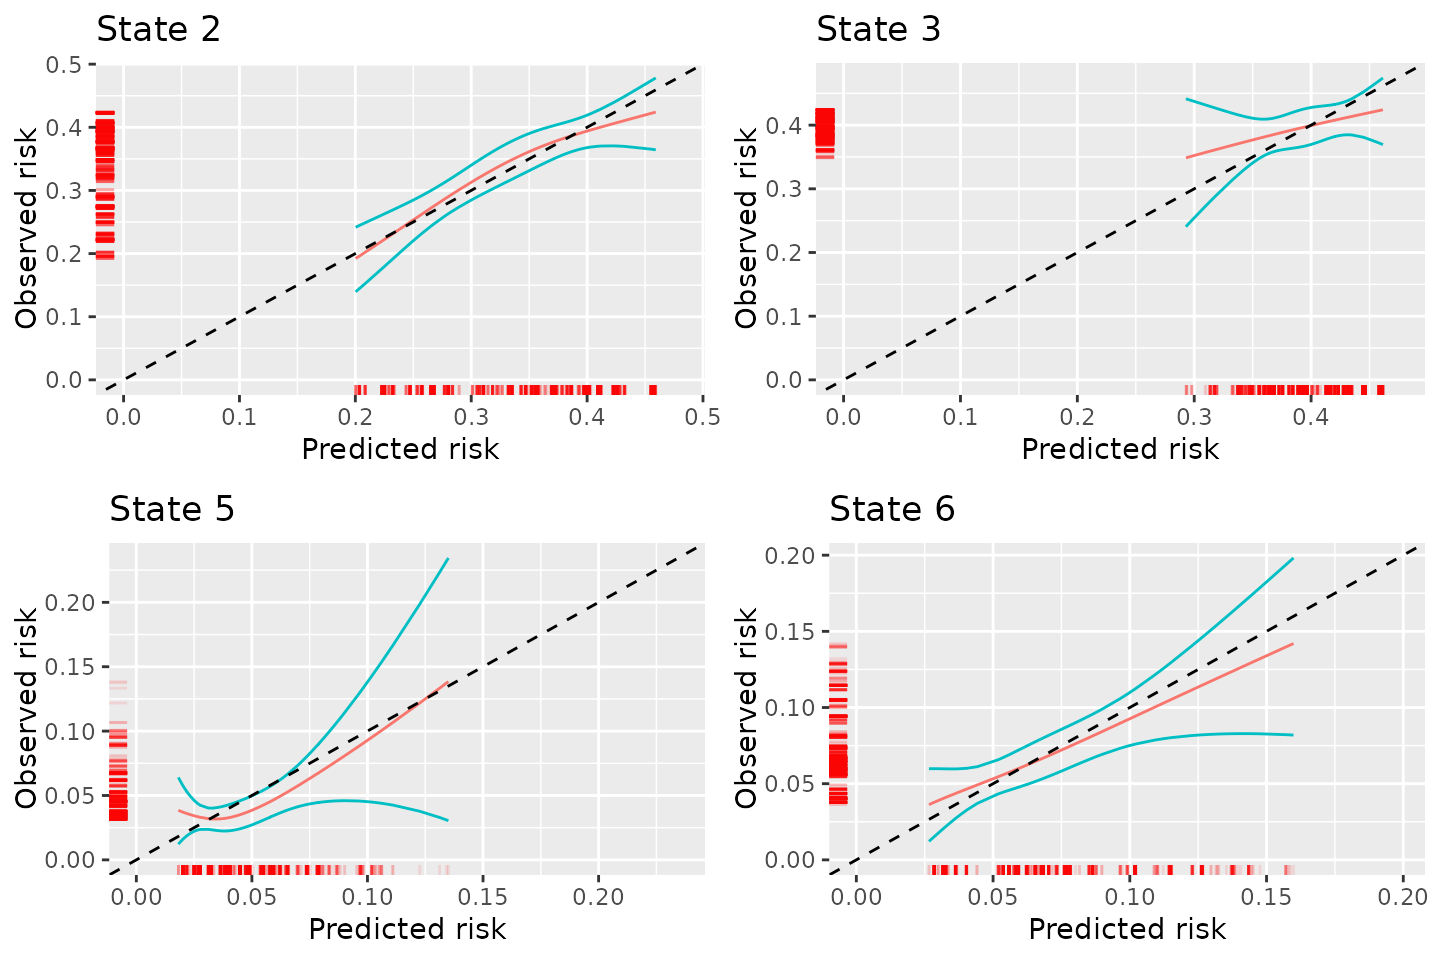 Figure 3: Calibration plots for competing risks model out of the starting state when using graphical calibration curves